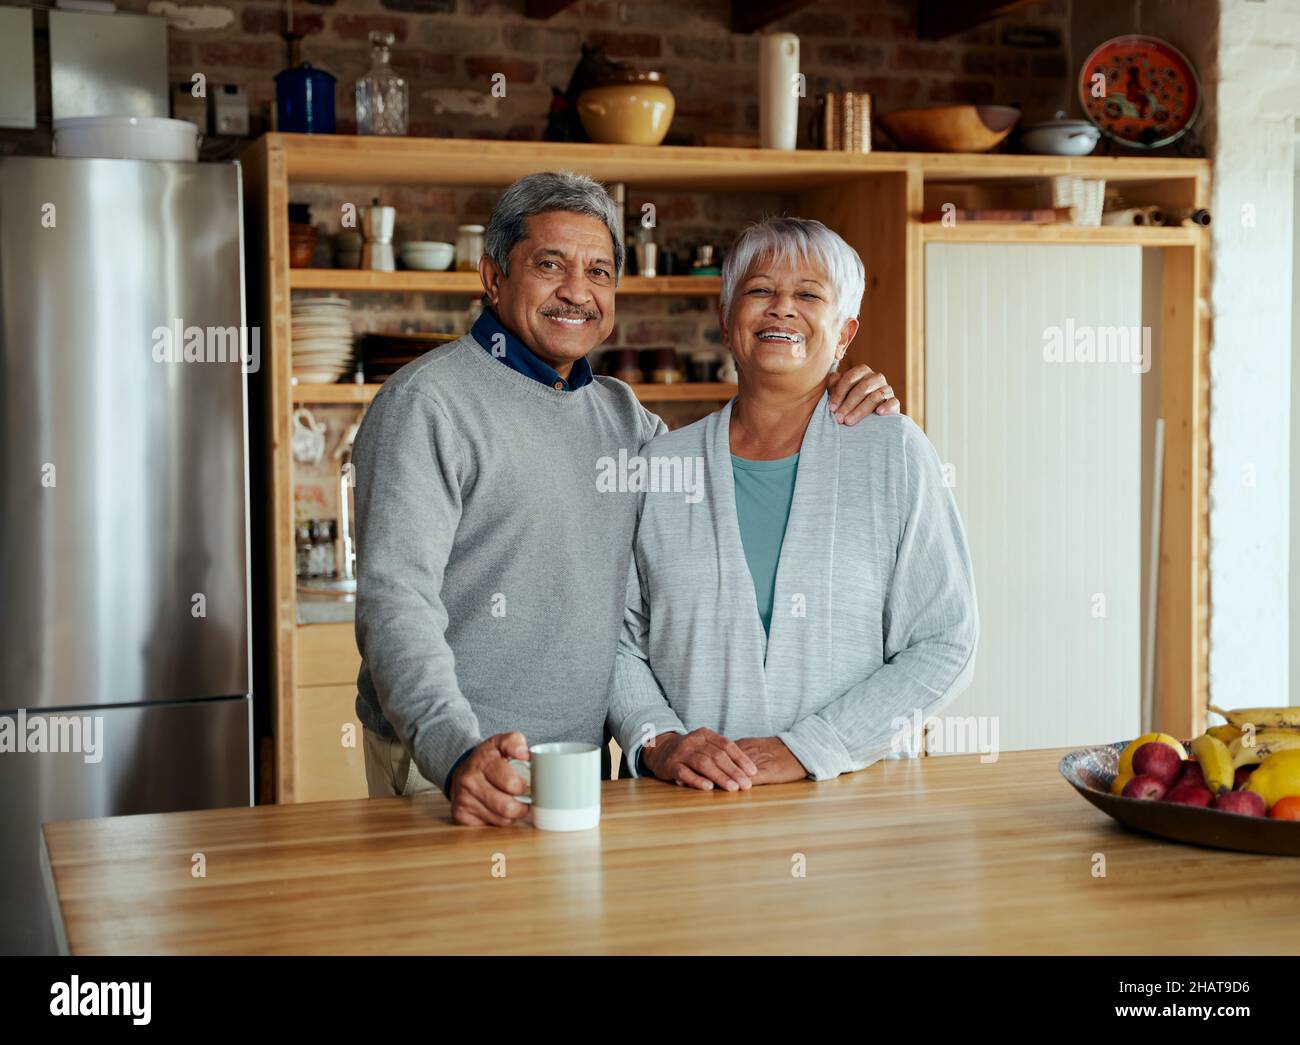 Portrait of elderly biracial couple laughing and looking happily at camera. Healthy, happy lifestyle at home. Stock Photo